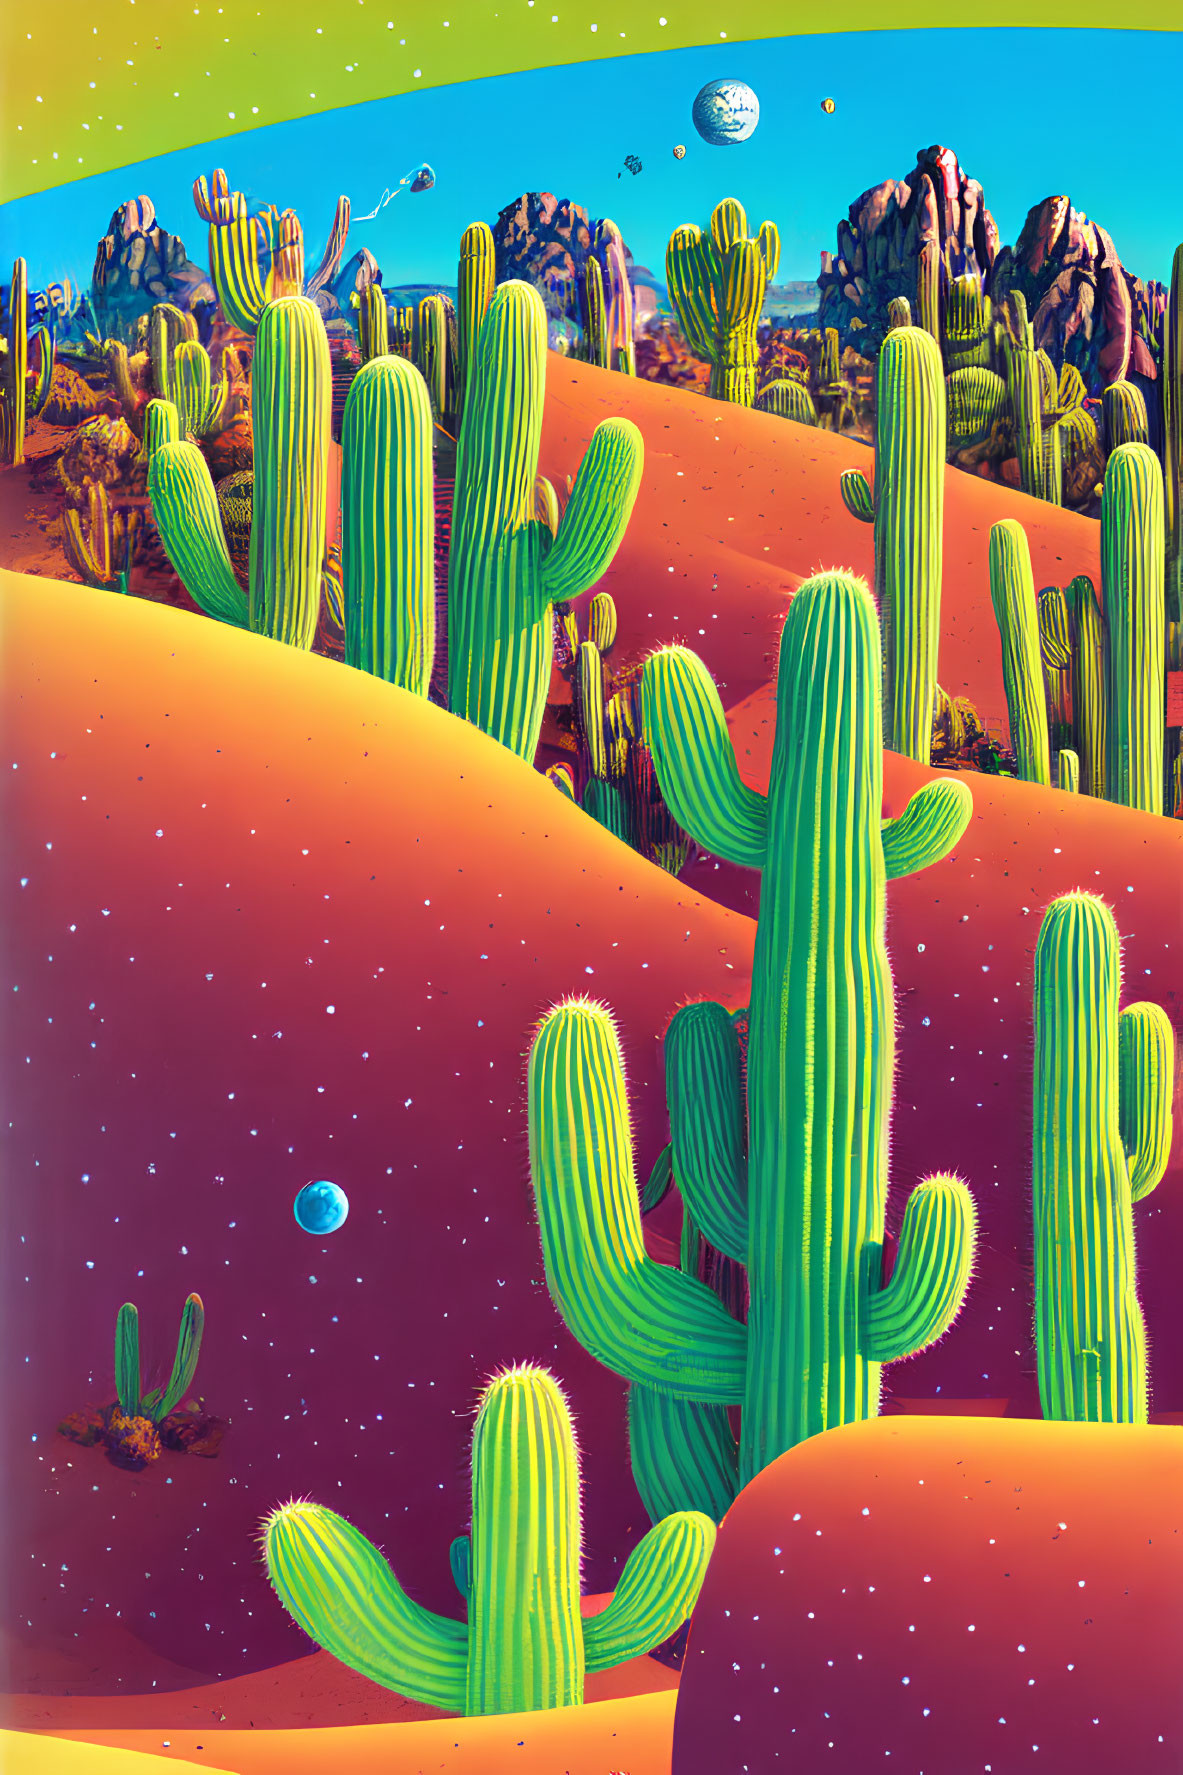 Colorful desert landscape with tall cacti and alien-like plants under blue sky